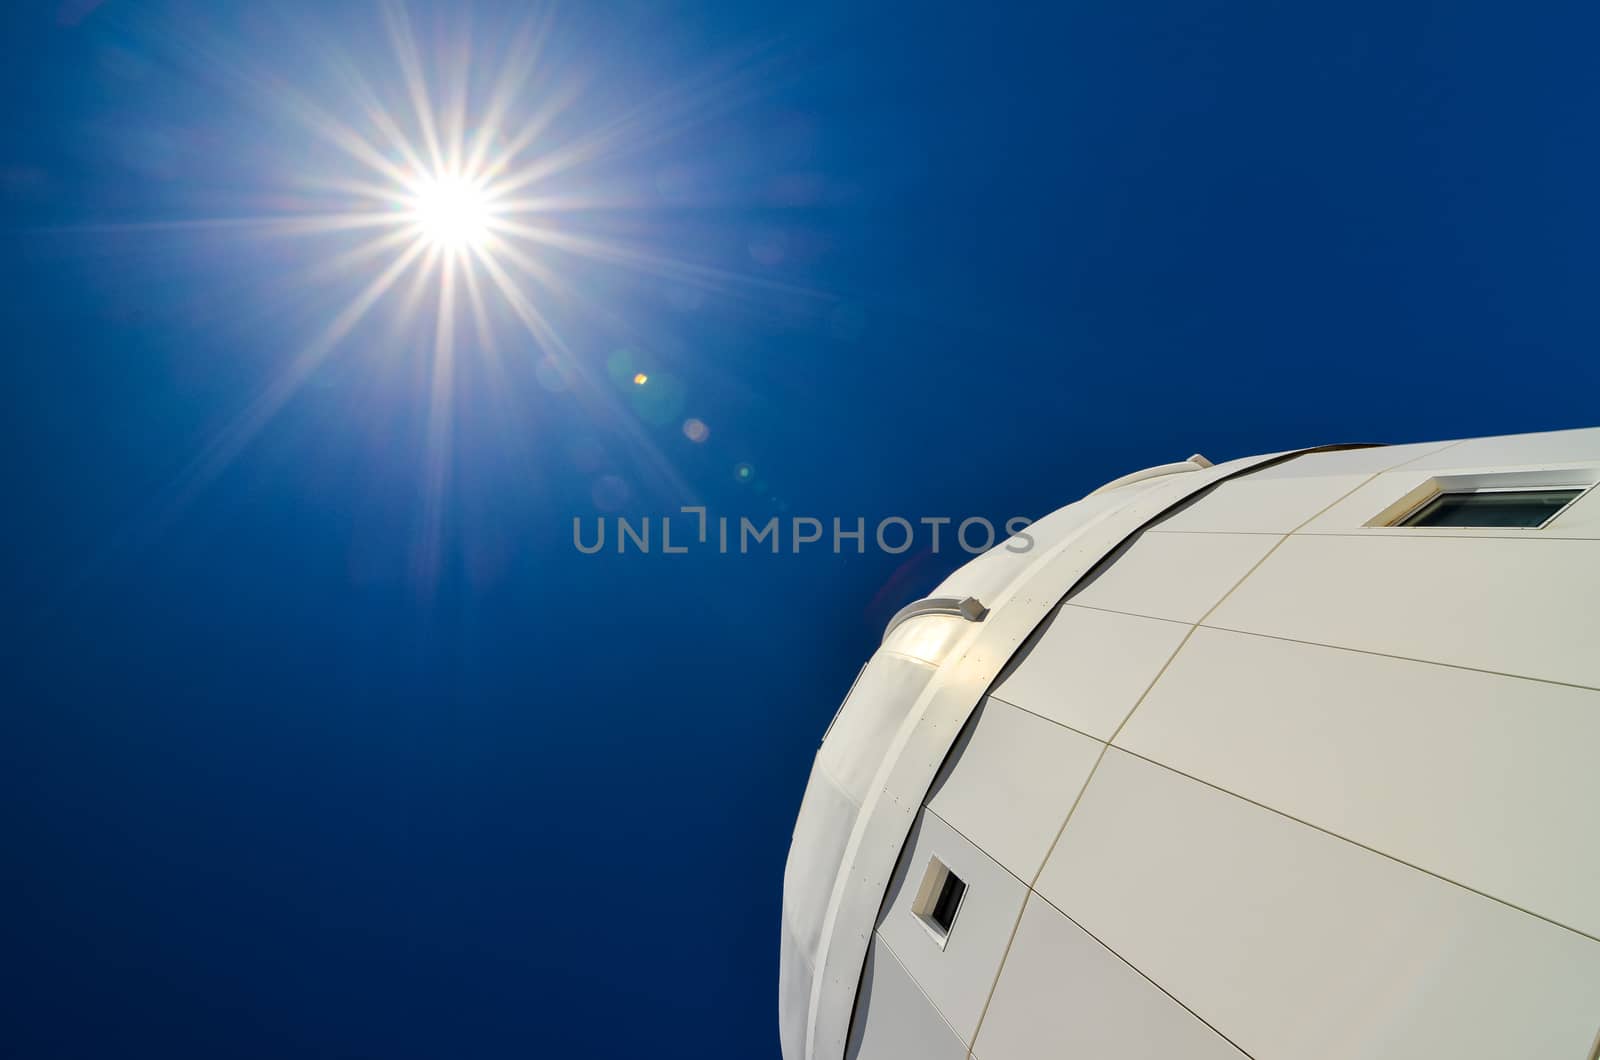 Telescopes of the Teide Astronomical Observatory by underworld